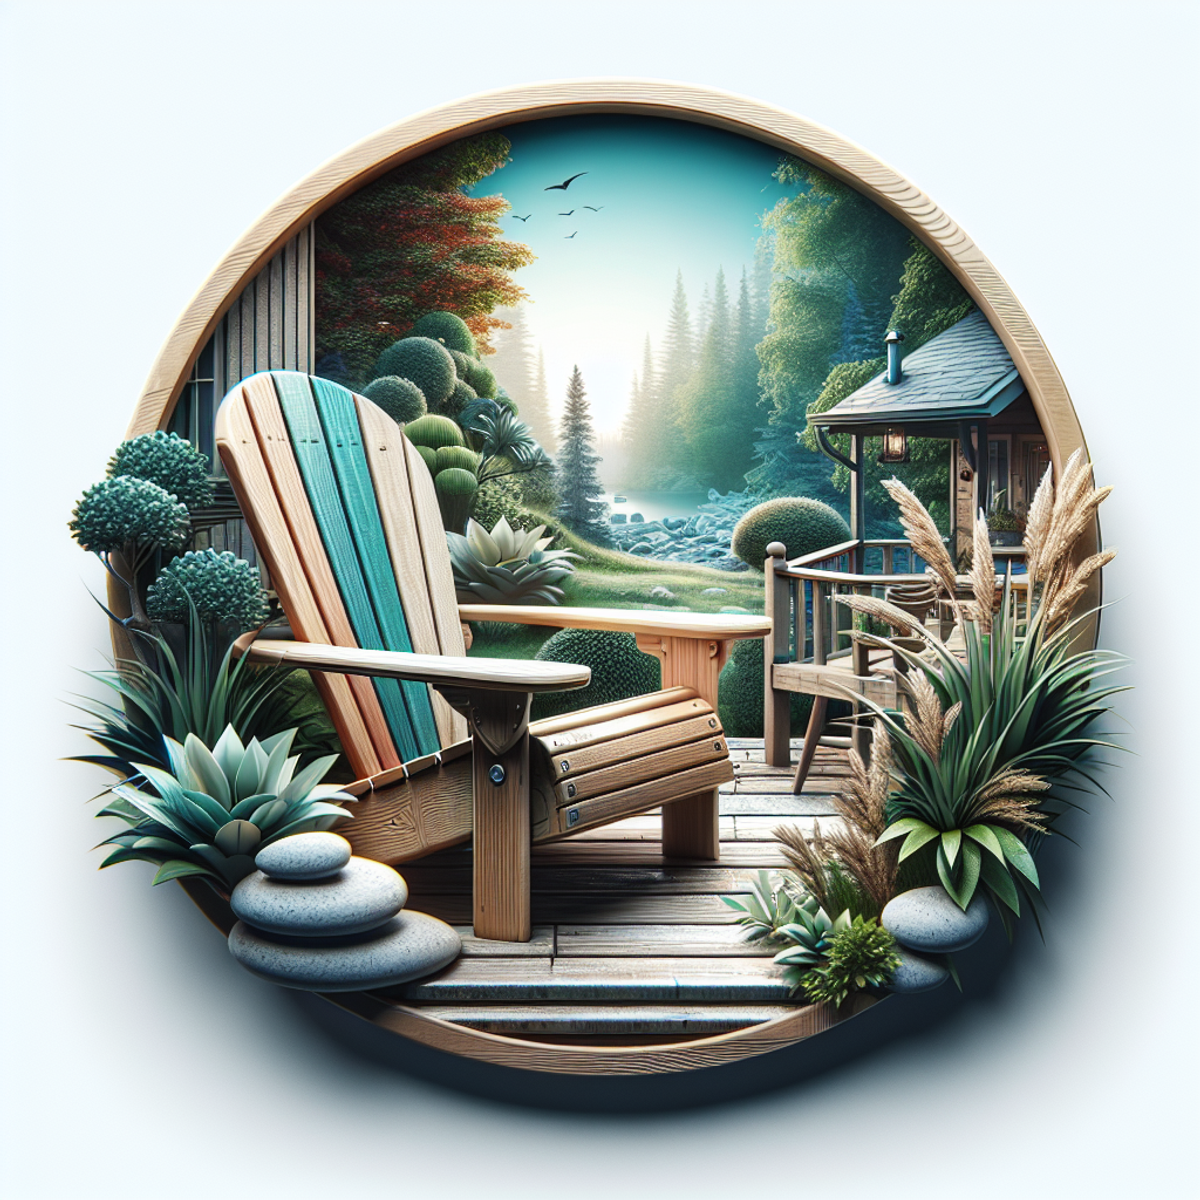 A wooden Adirondack chair sits in a lush garden, surrounded by blooming flowers and tall trees. The chair looks sturdy and inviting, with a plump cushion and wide armrests. The sun shines through the leaves, casting dappled shadows on the ground.